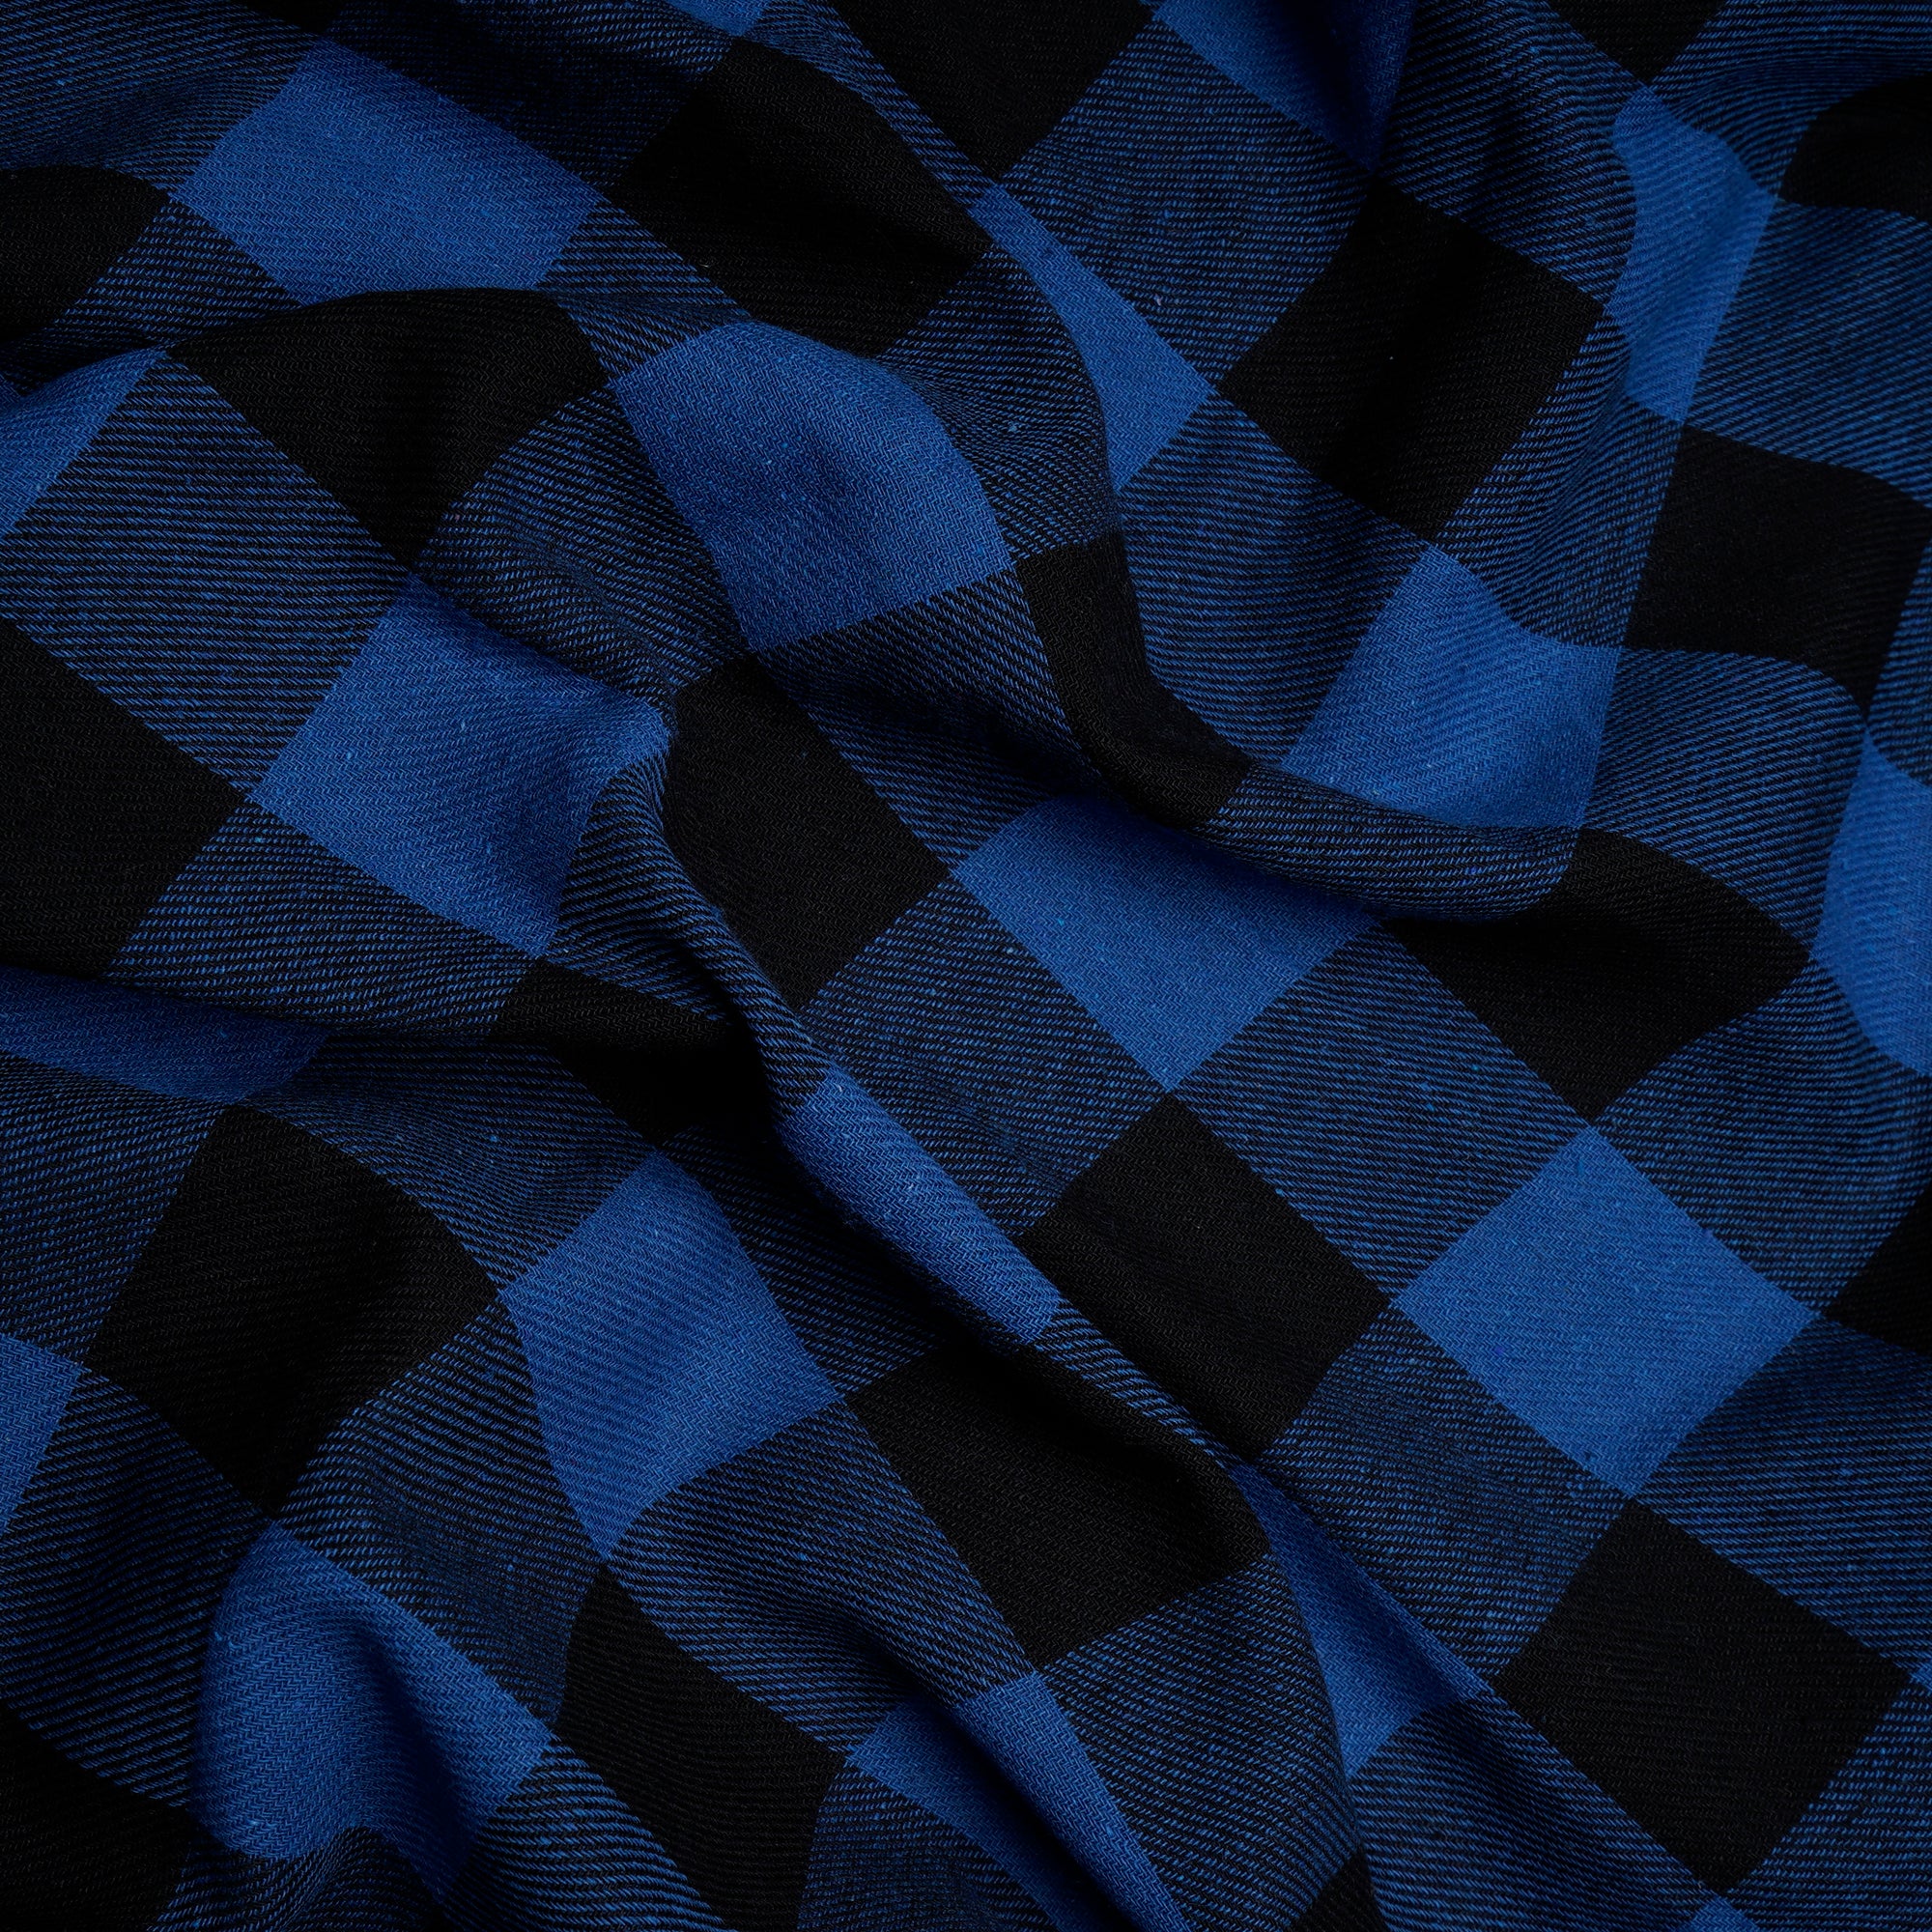 Blue-Black Yarn Dyed Flannel Cotton Check Fabric